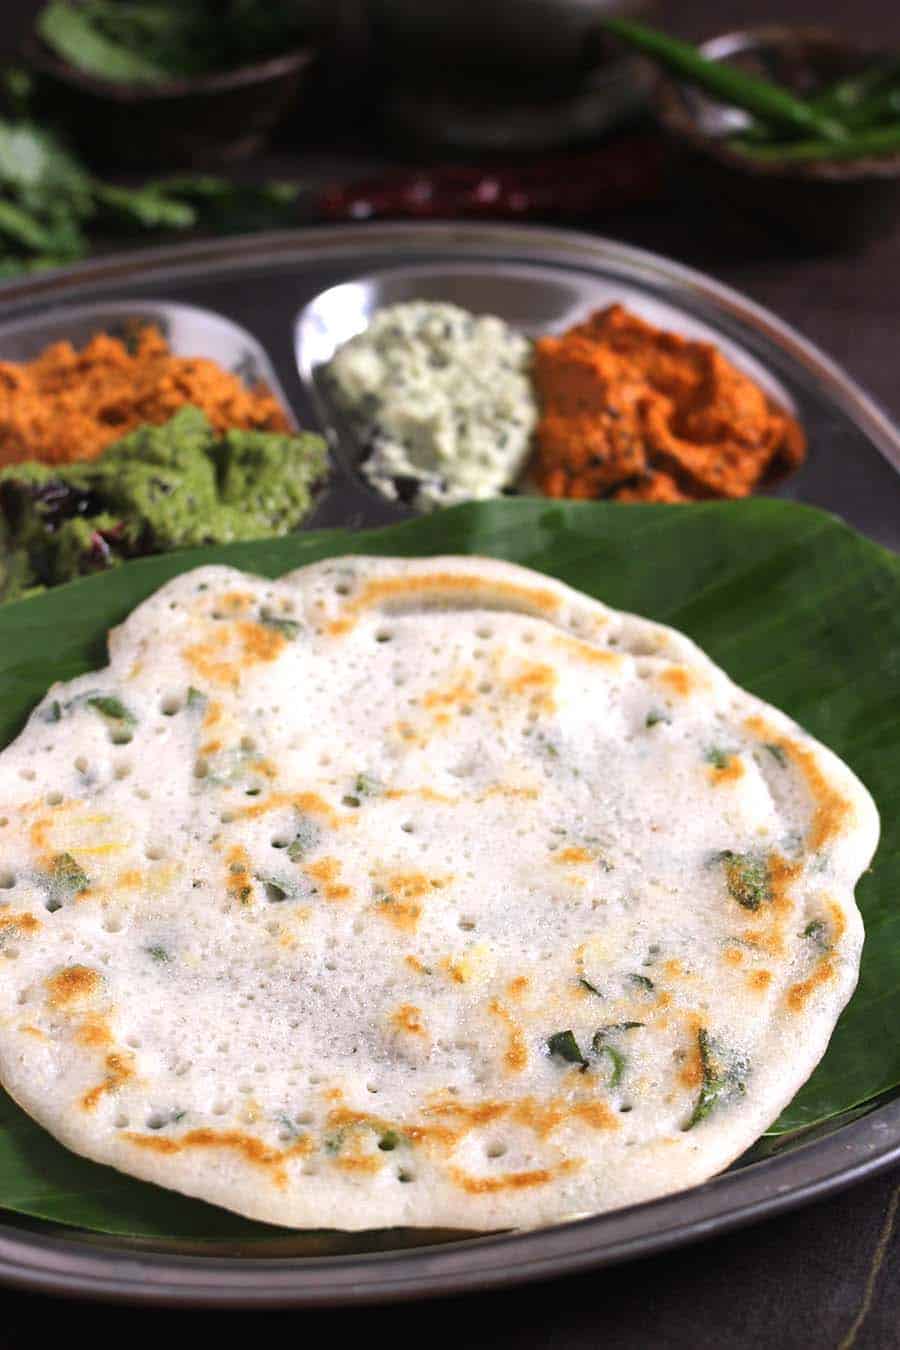 flavored soft and spongy, sada set dosa or dosai or dose with chutney for breakfast, lunch, dinner